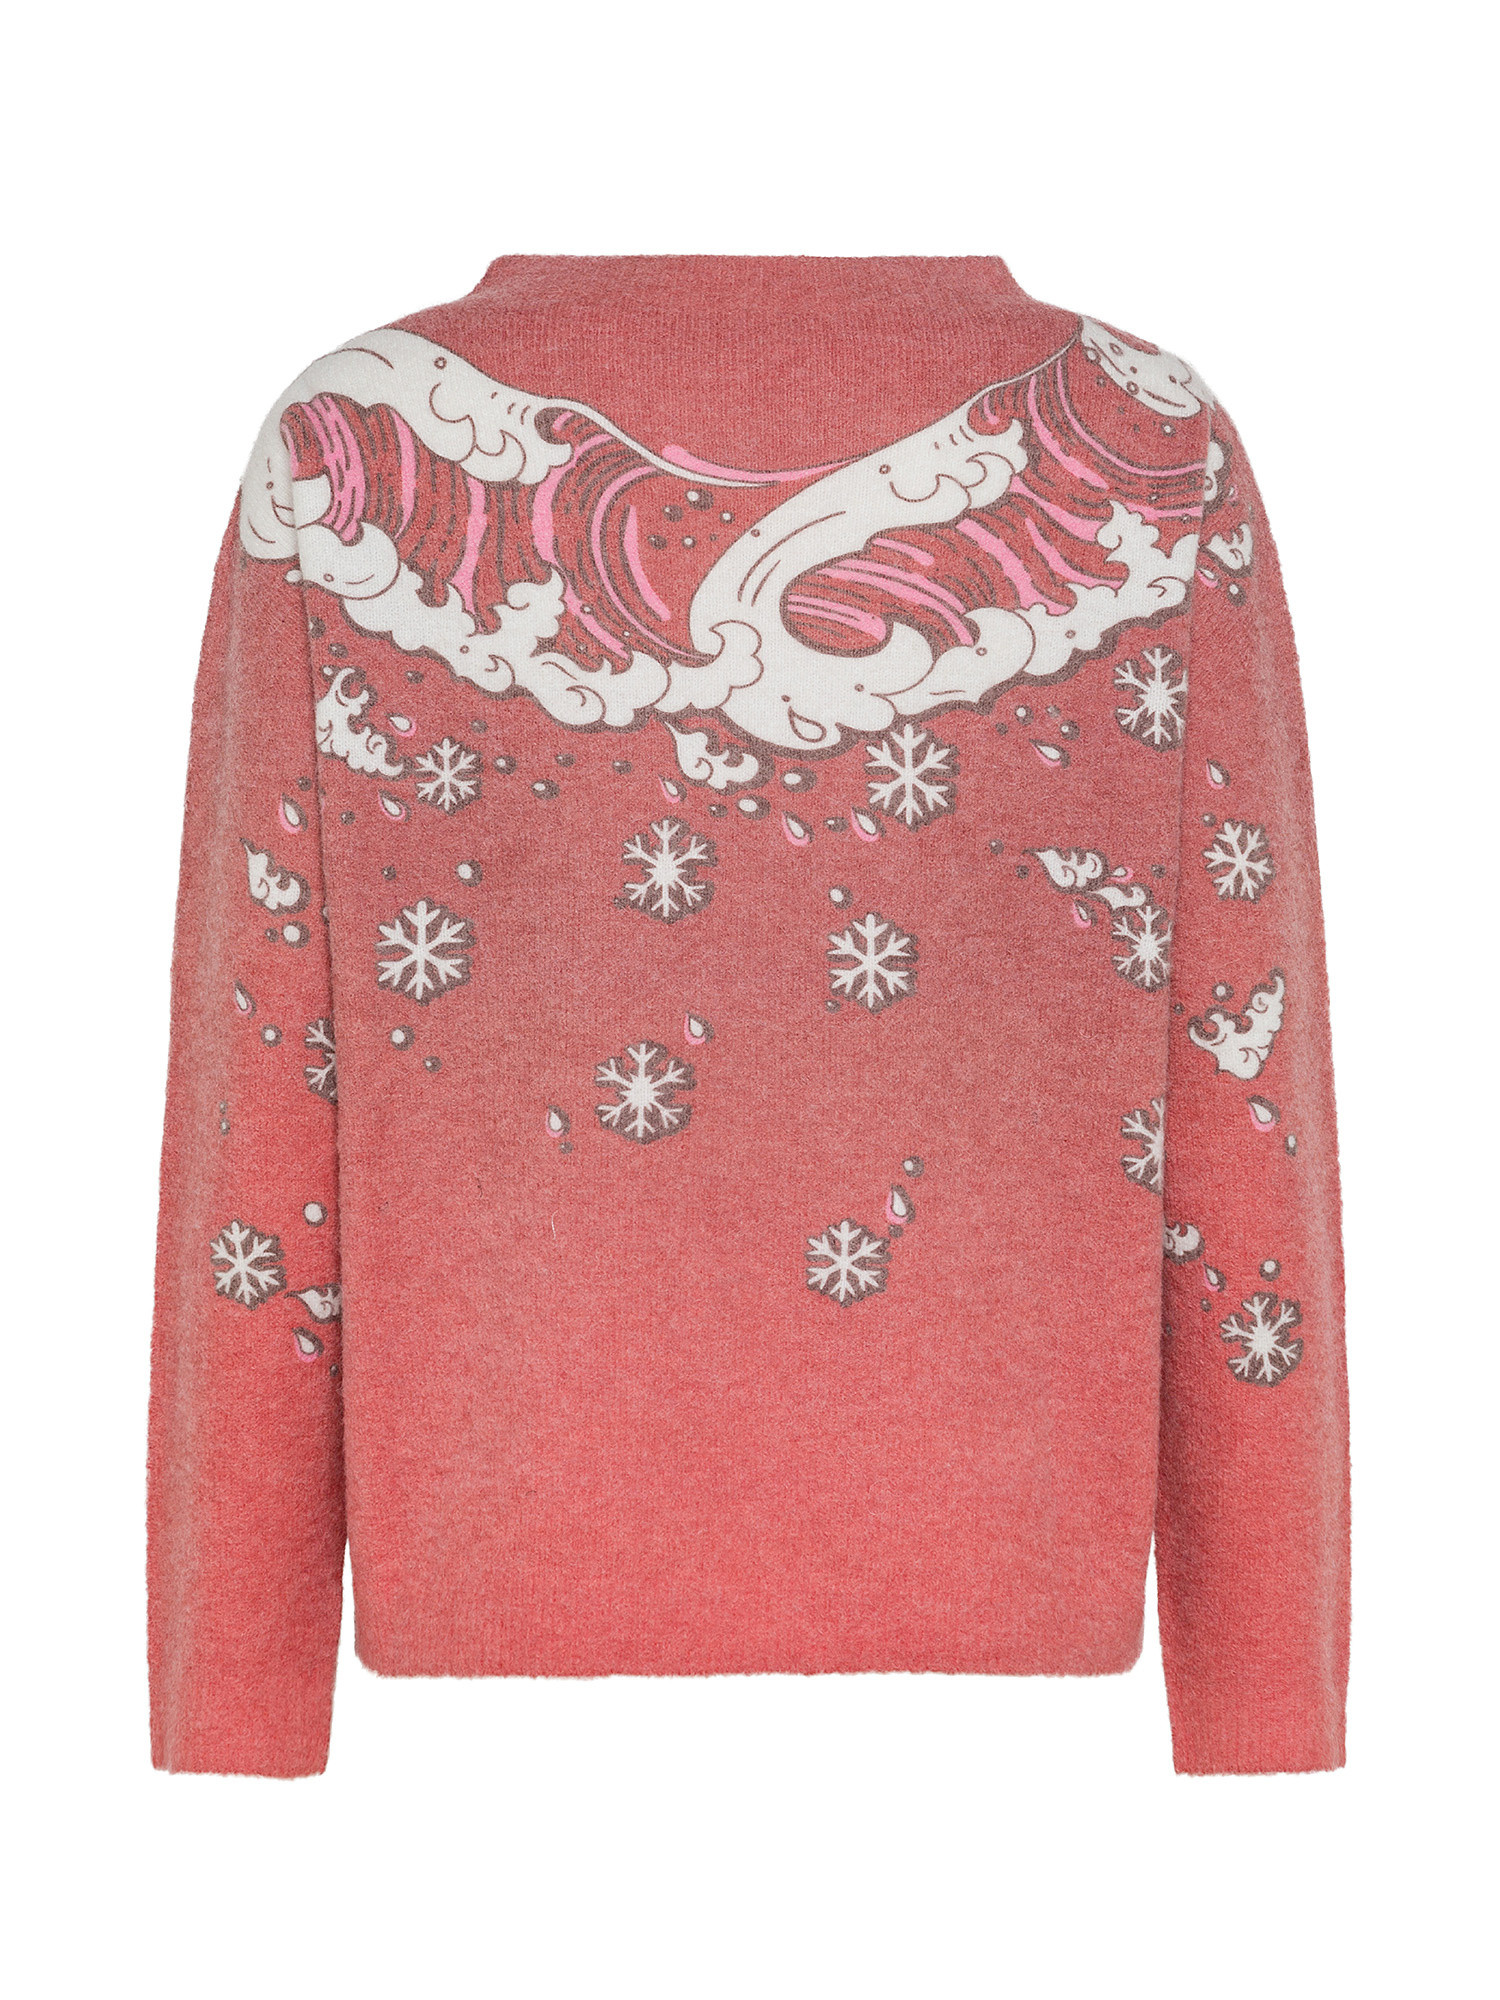 Pullover The Surfer’s Christmas by Paula Cademartori, Rosso, large image number 1